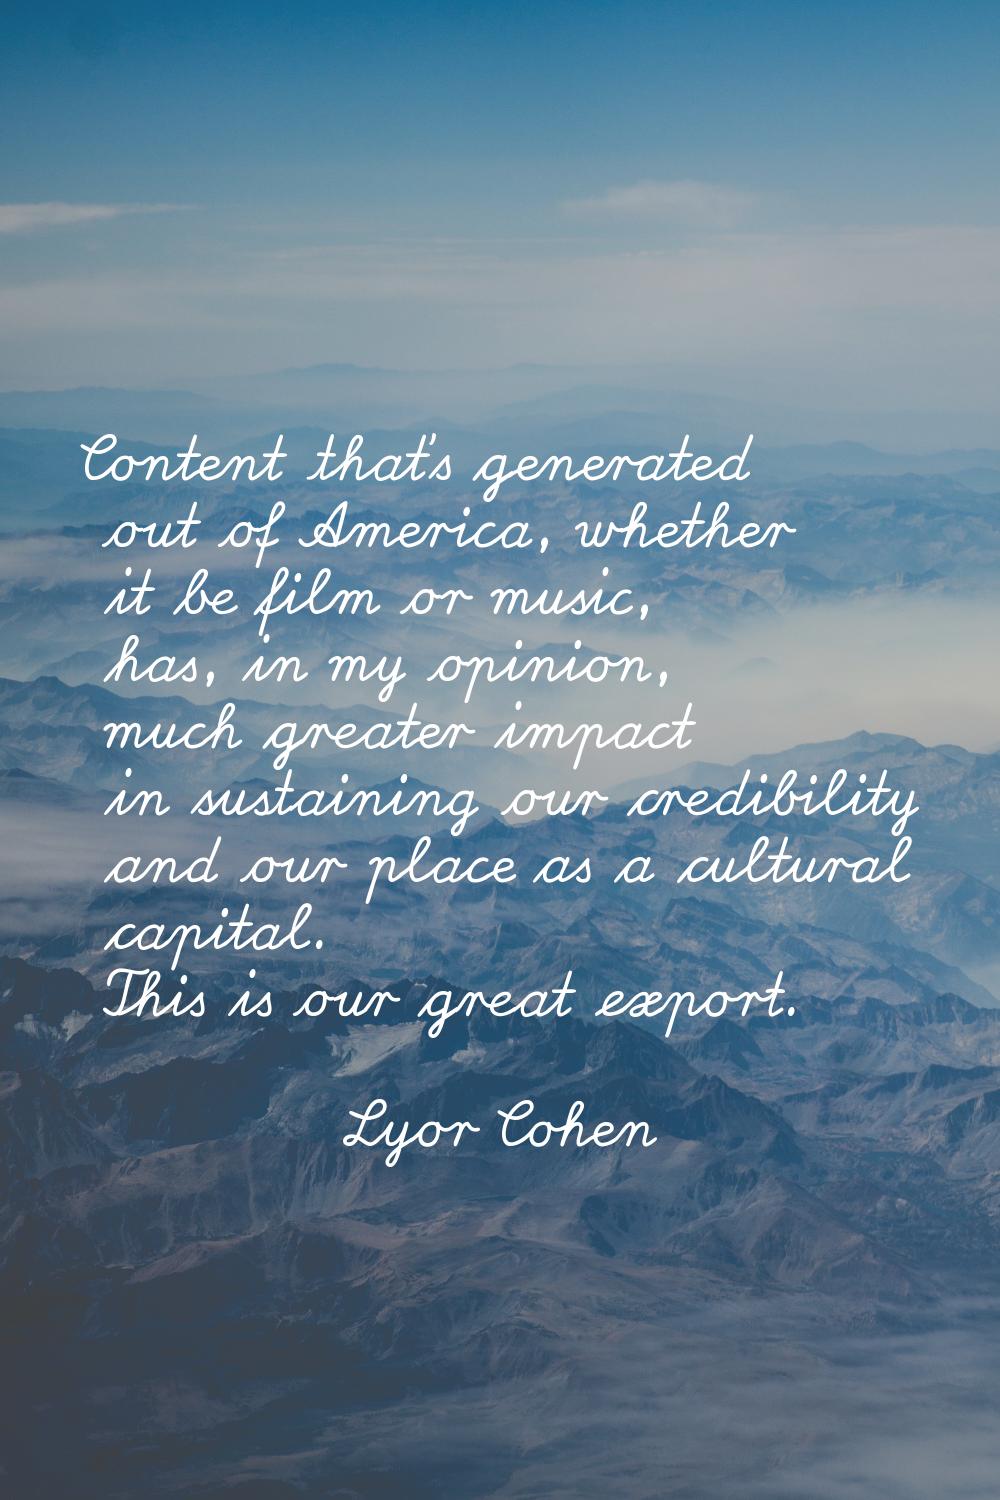 Content that's generated out of America, whether it be film or music, has, in my opinion, much grea